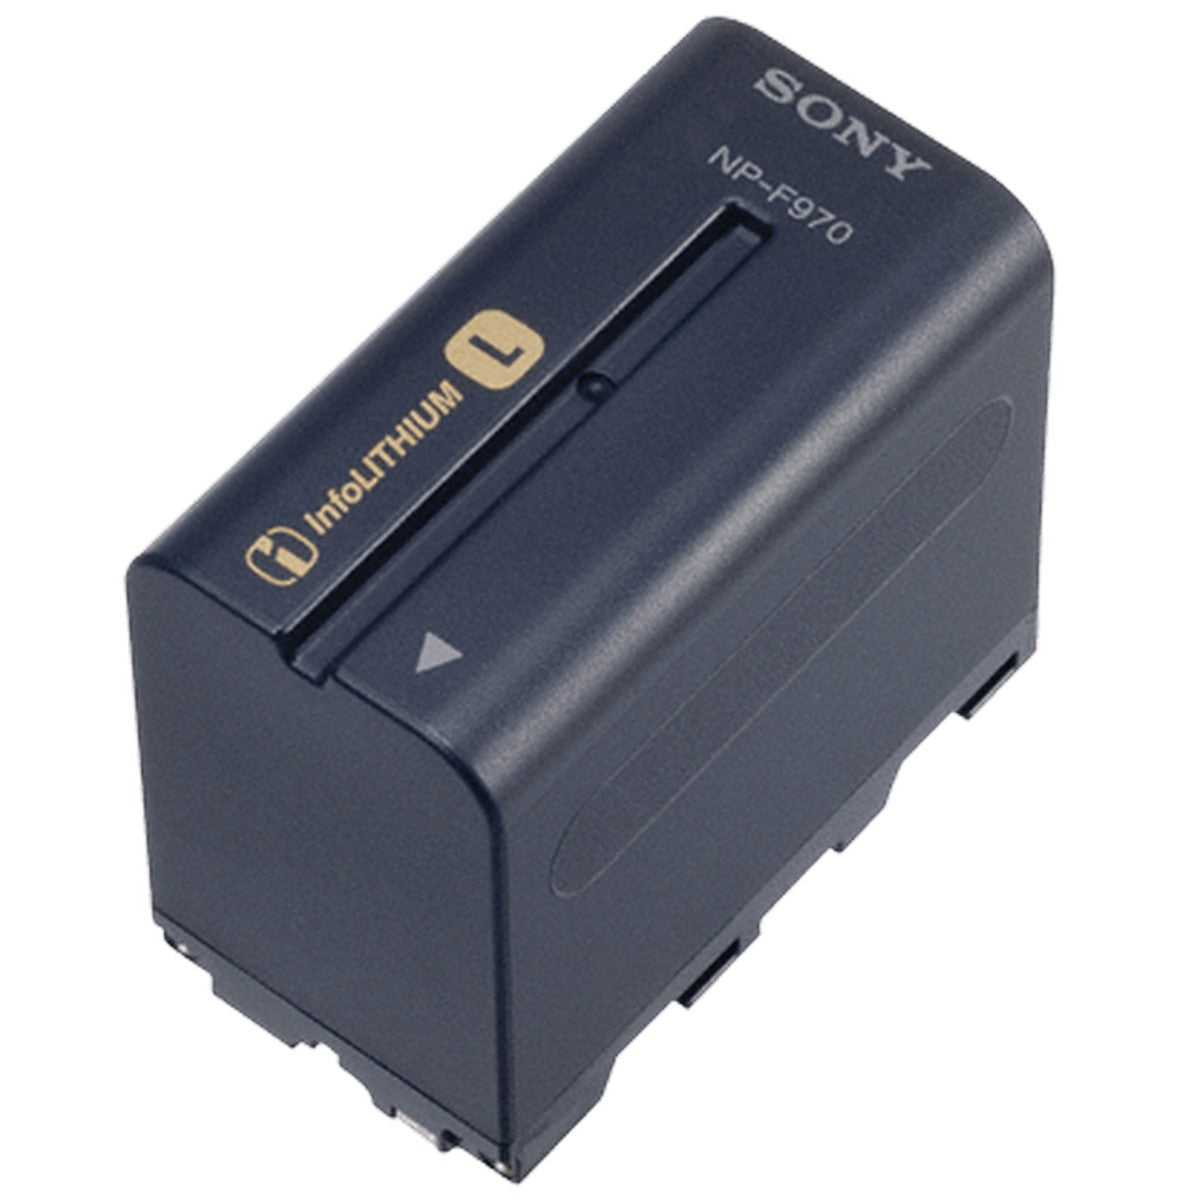 Sony NP-F970 | InfoLITHIUM L Series Rechargeable Battery Single